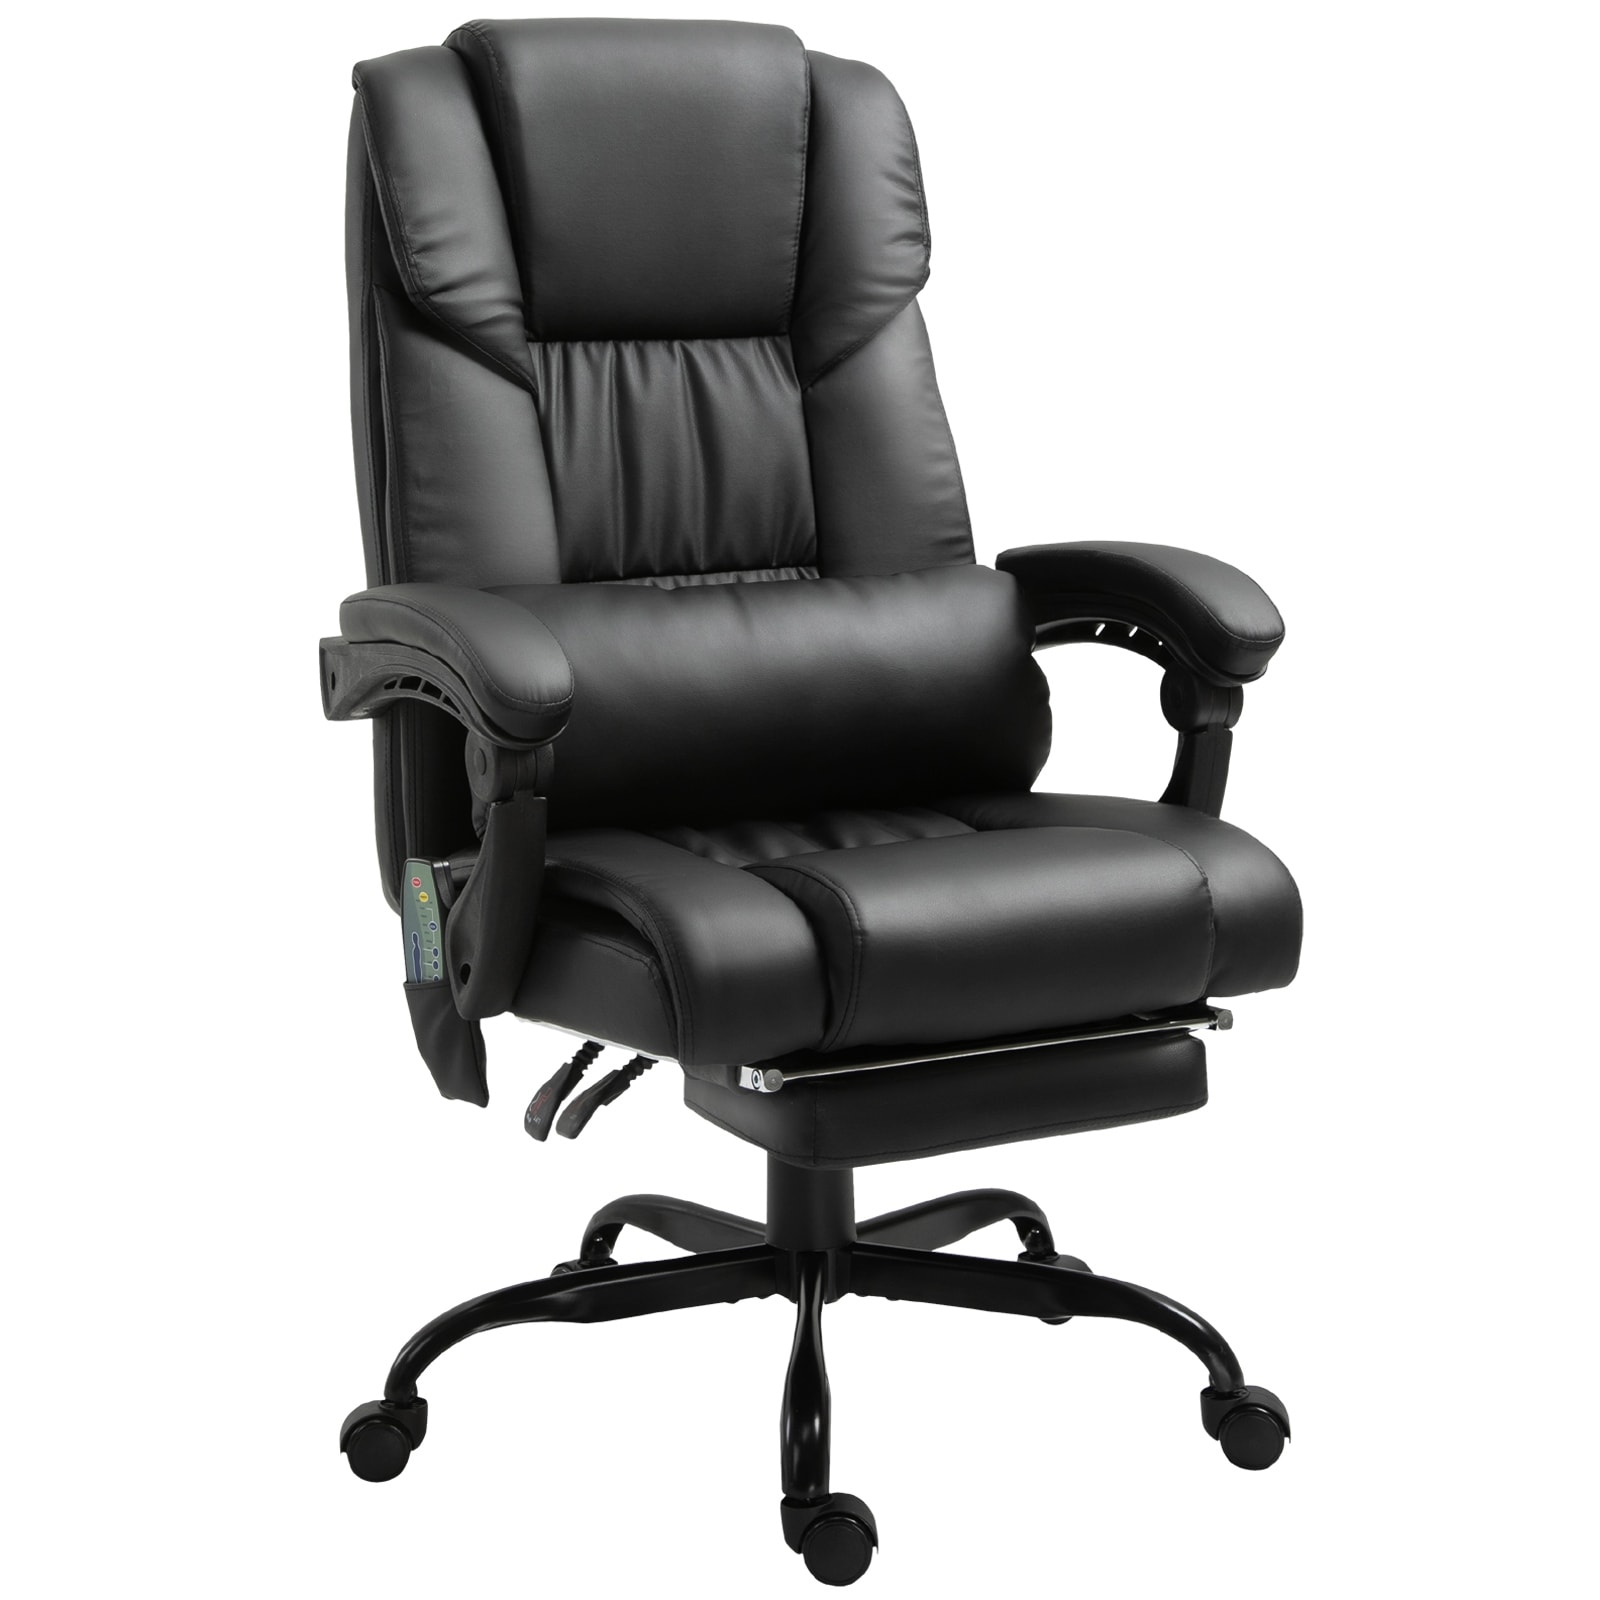 https://ak1.ostkcdn.com/images/products/is/images/direct/635a9e0739ab253ed6df54fdeb19e9b9b8de778a/Vinsetto-Office-Desk-Chair-Recliner%2C-Height-Adjustable-Movable-Lumbar-Support-with-6-Point-Vibrating-Massage.jpg